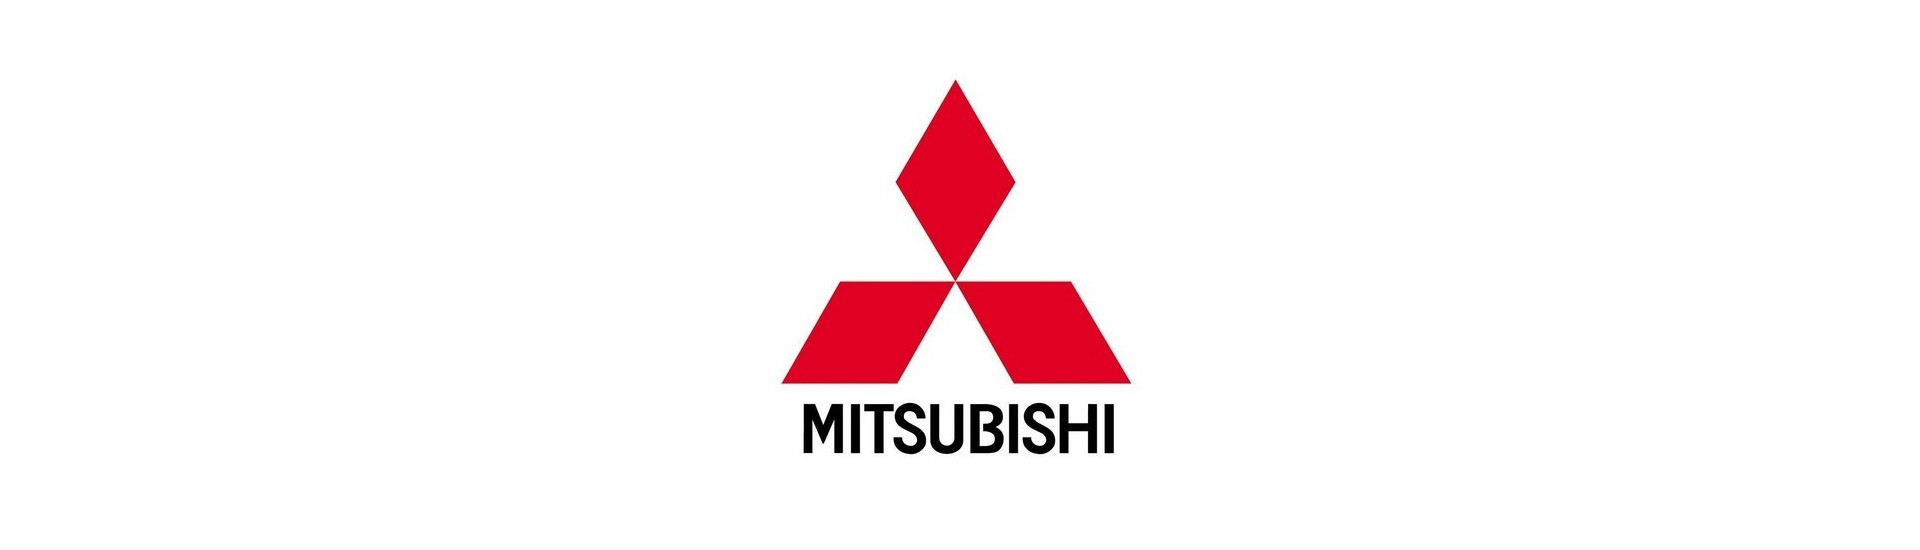 Preheating candle at best price car without permit Mitsubishi